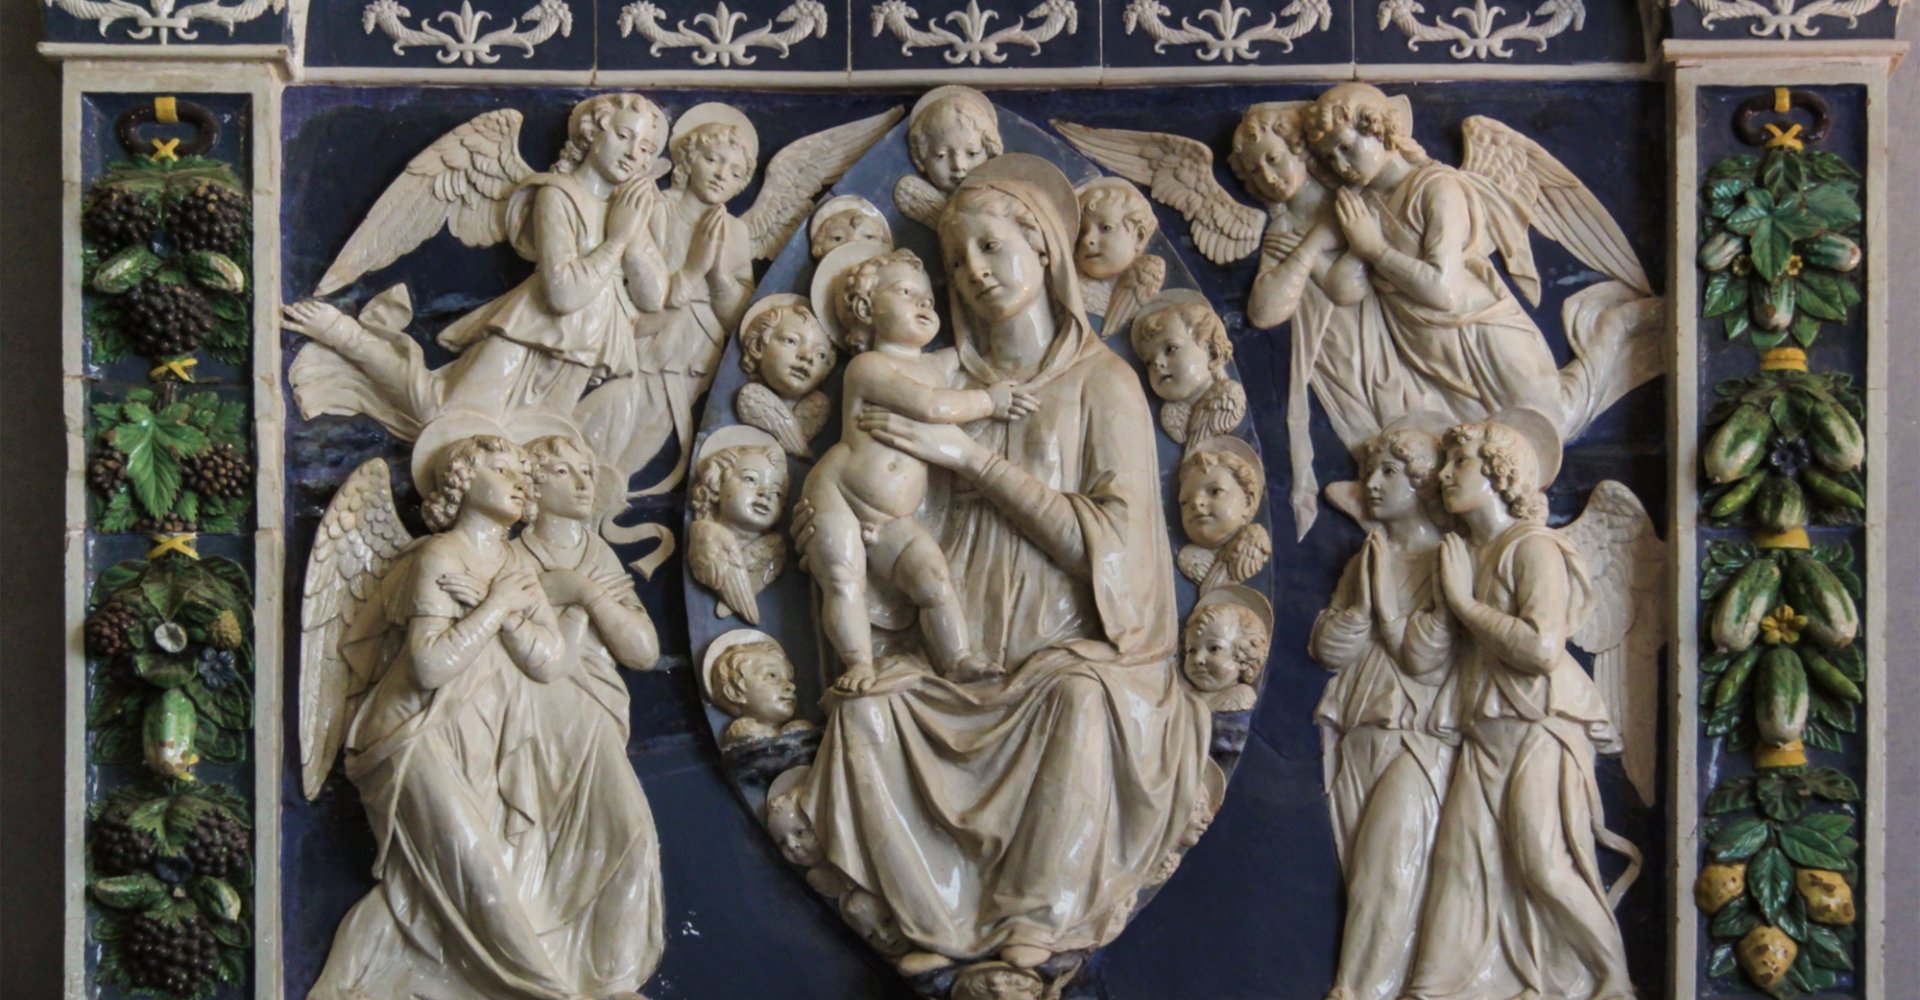 Work by the Della Robbia family at the Bardini Museum